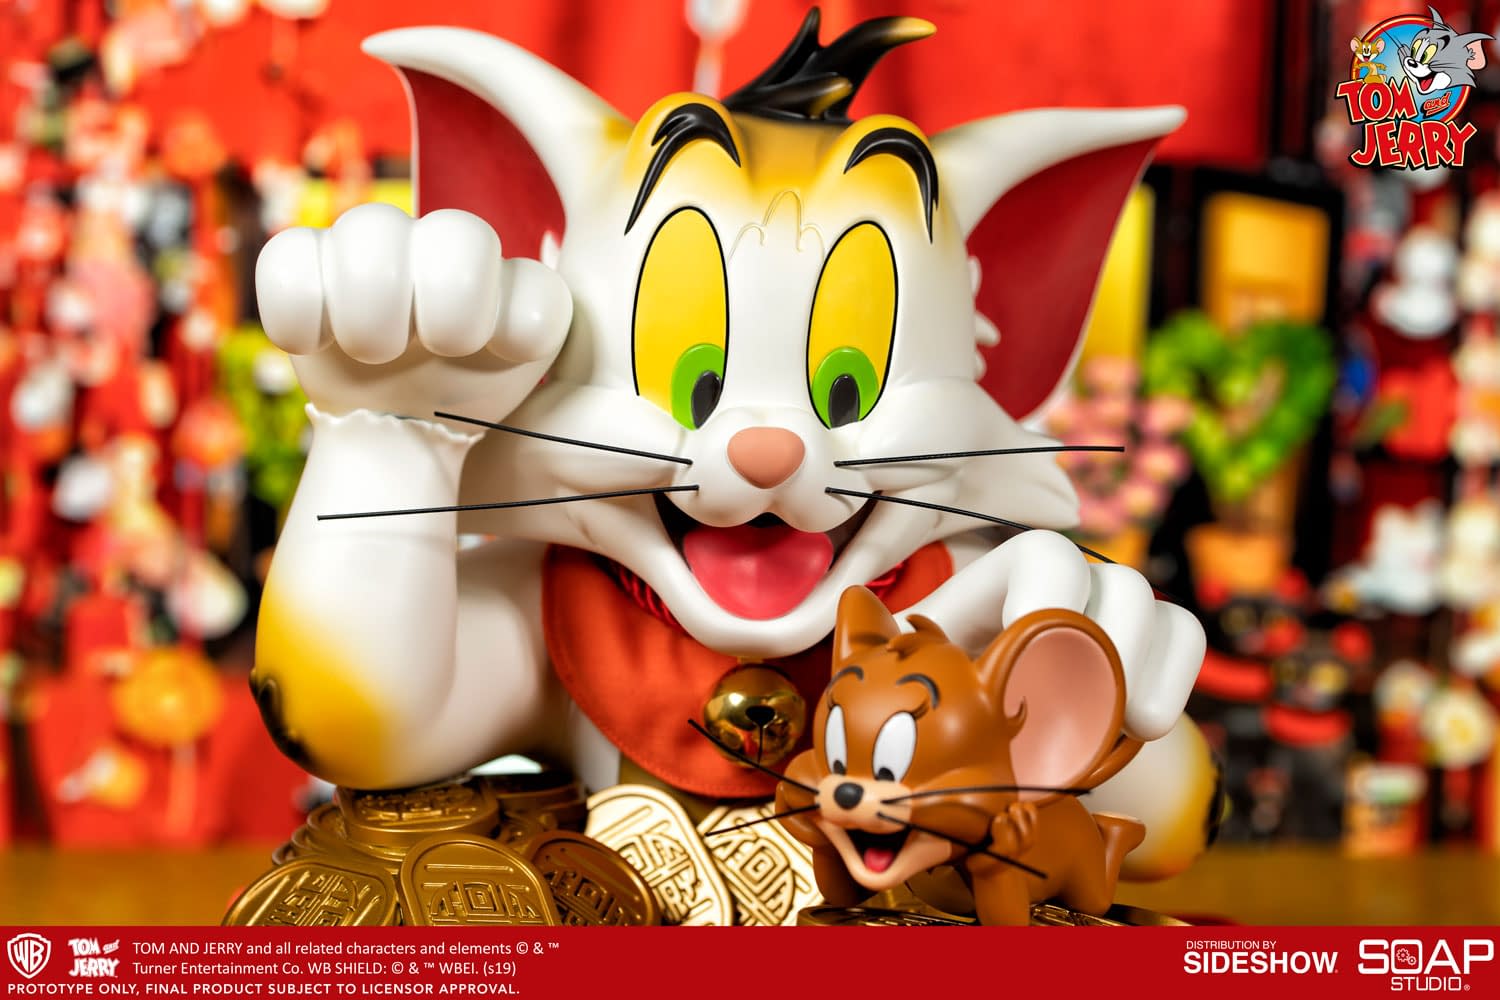 red tom and jerry